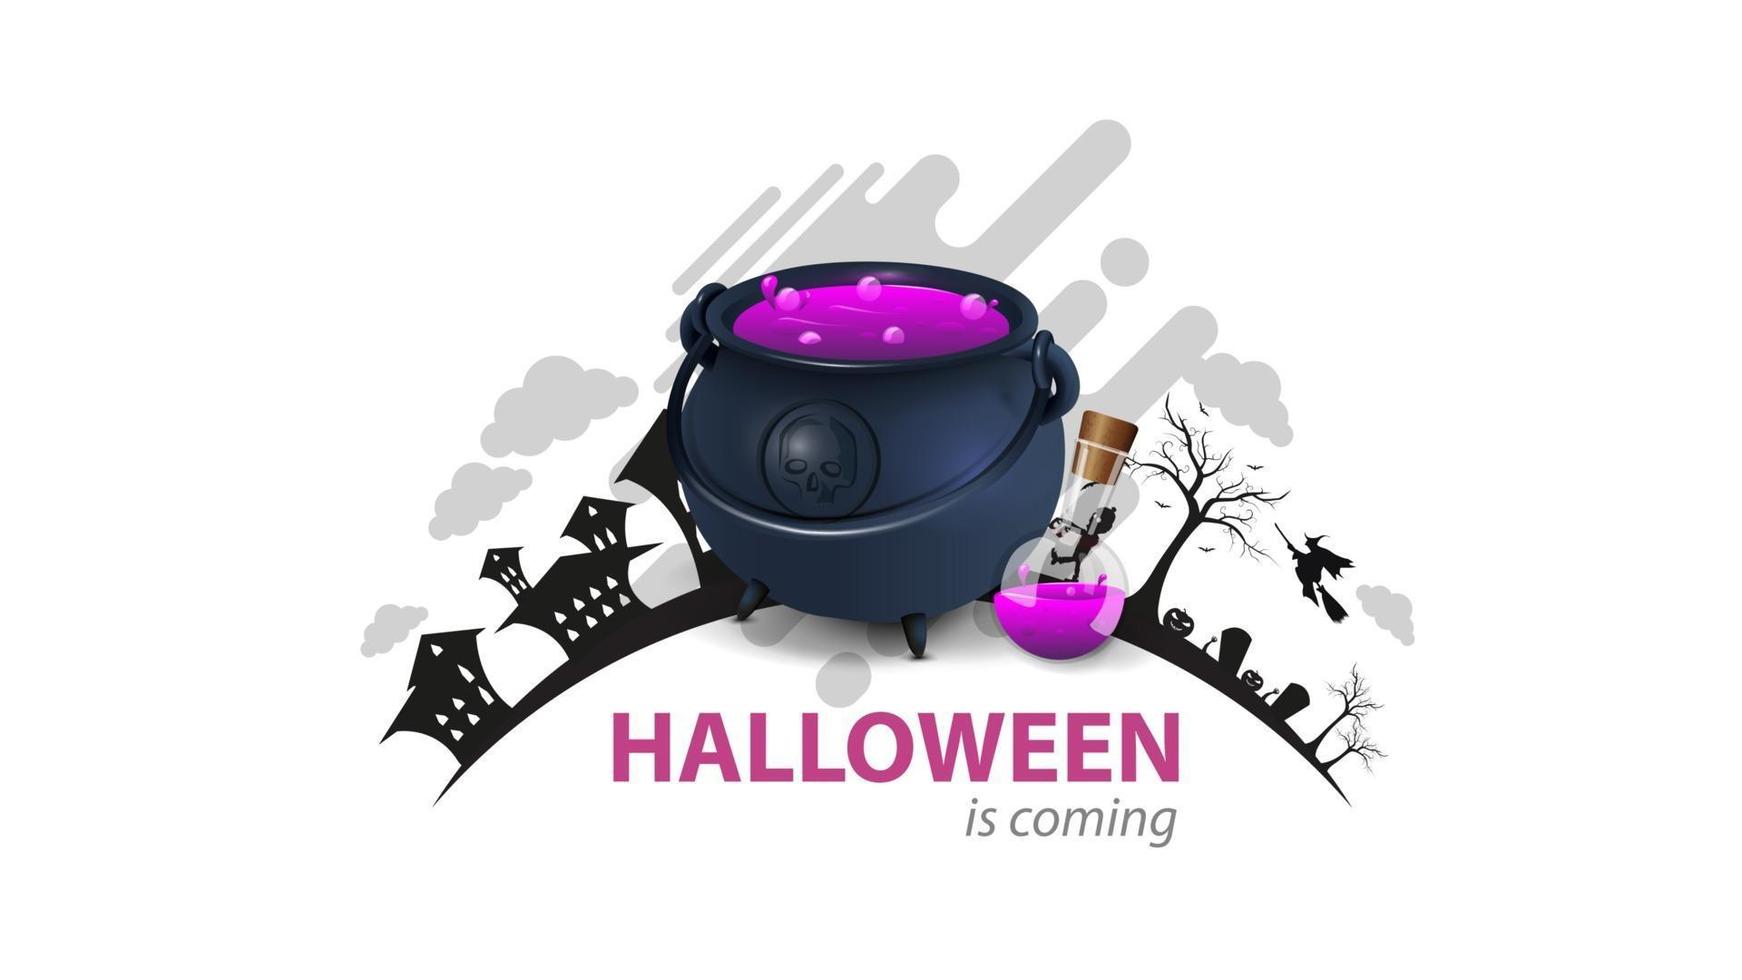 Halloween is coming, white greeting card with witch's cauldron with potion. The logo with the silhouette of the earth with Halloween night vector